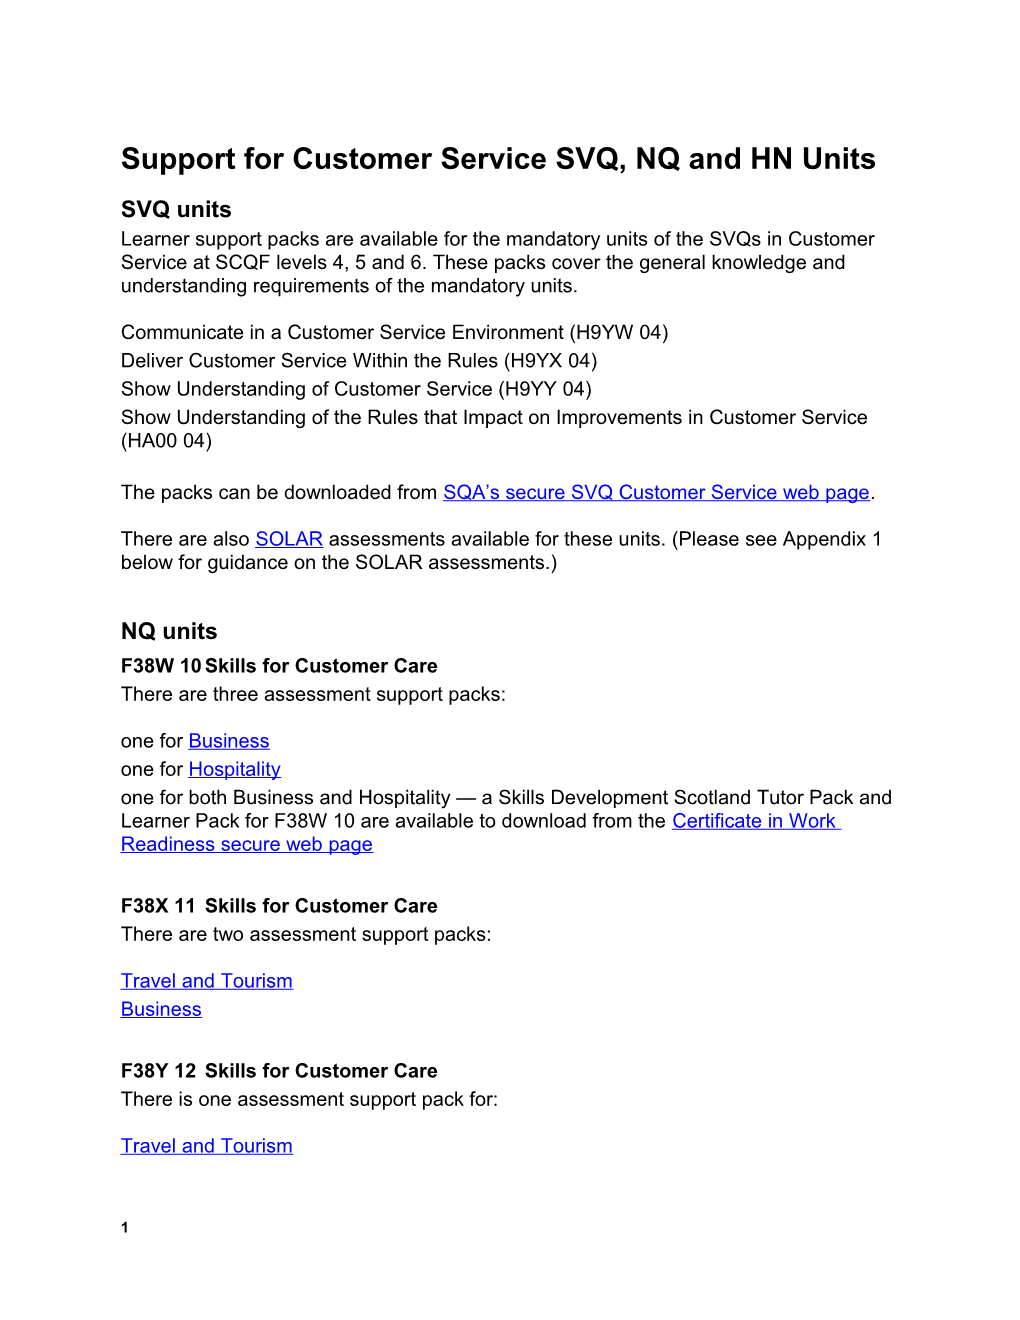 Support for Customer Service SVQ, NQ and HN Units